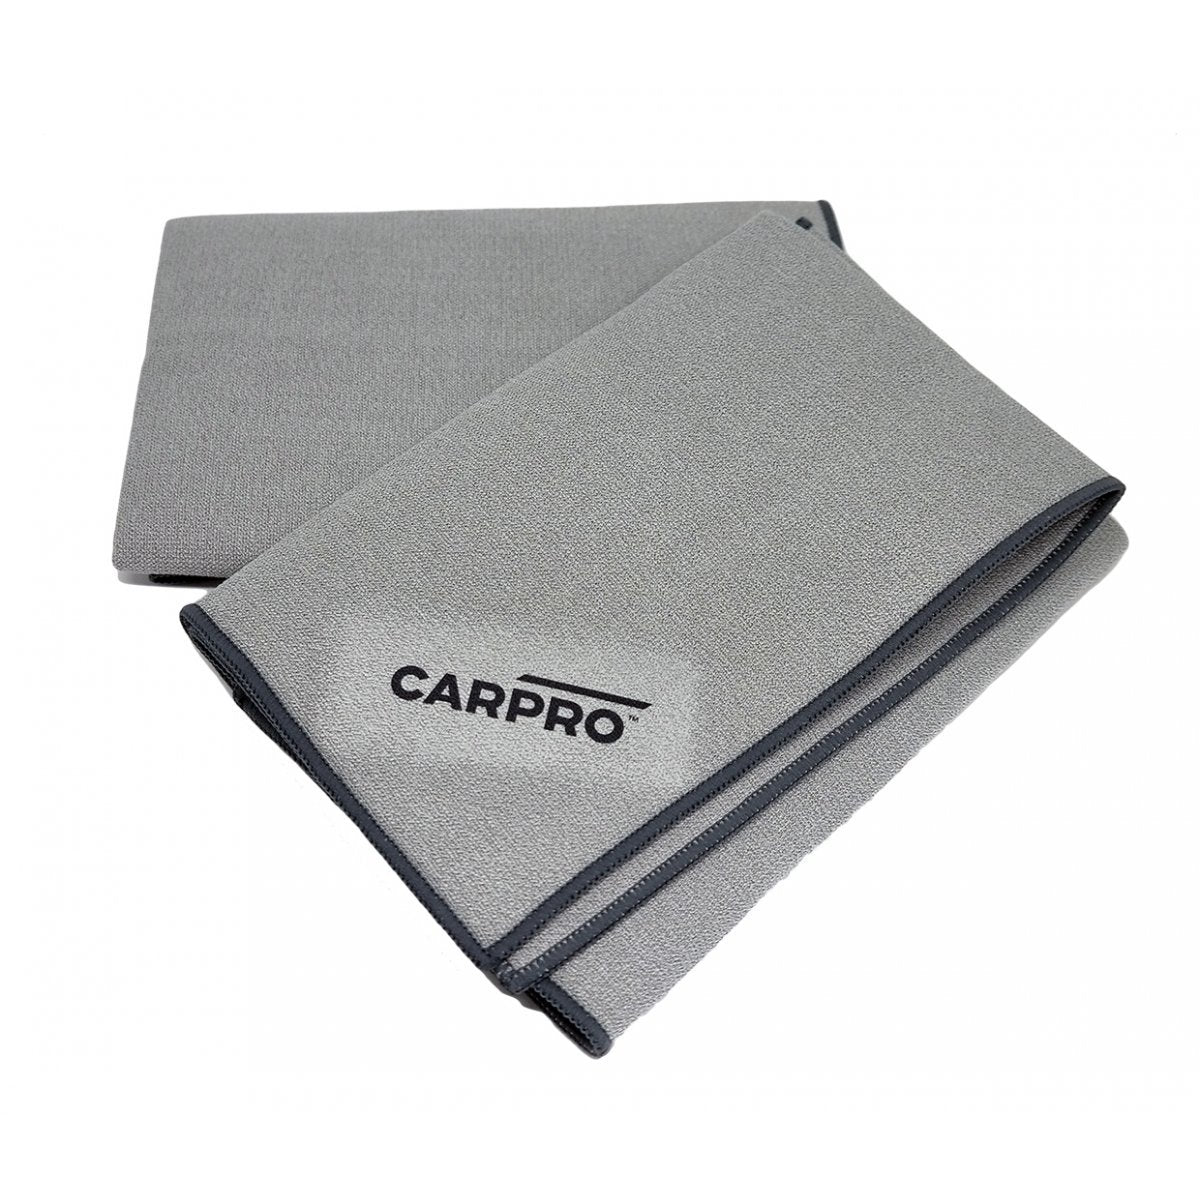 CarPro GlassFibre Glass Cleaning Cloth